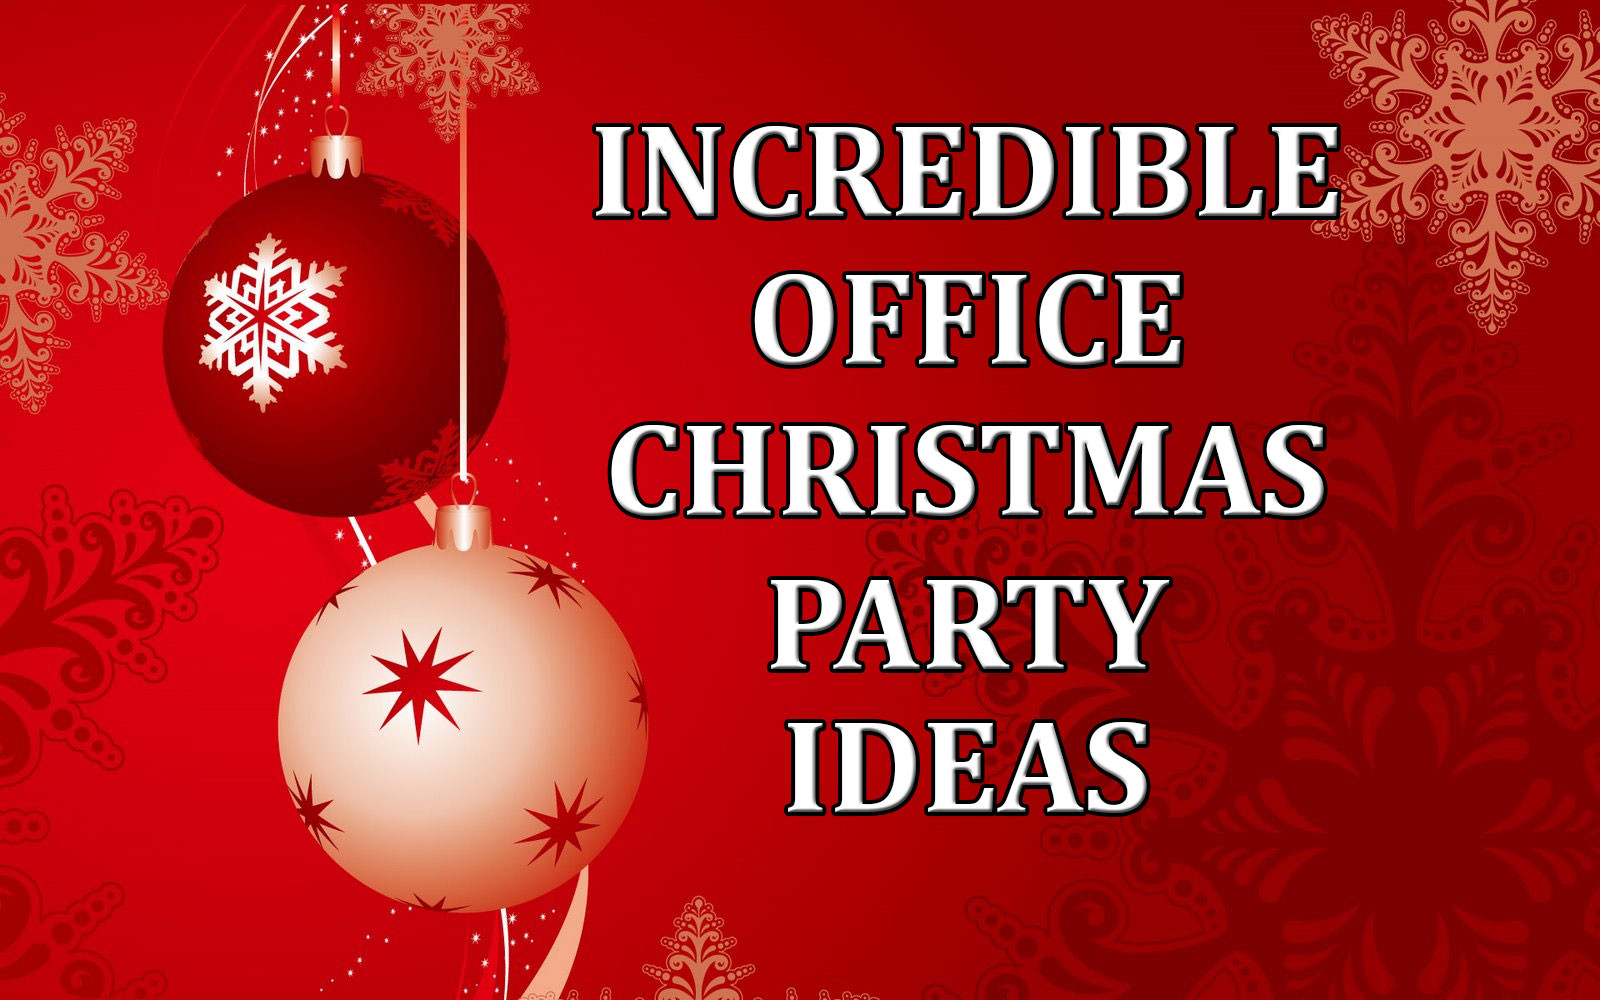 Christmas Party Office Ideas
 Incredible fice Christmas Party Ideas edy Ventriloquist